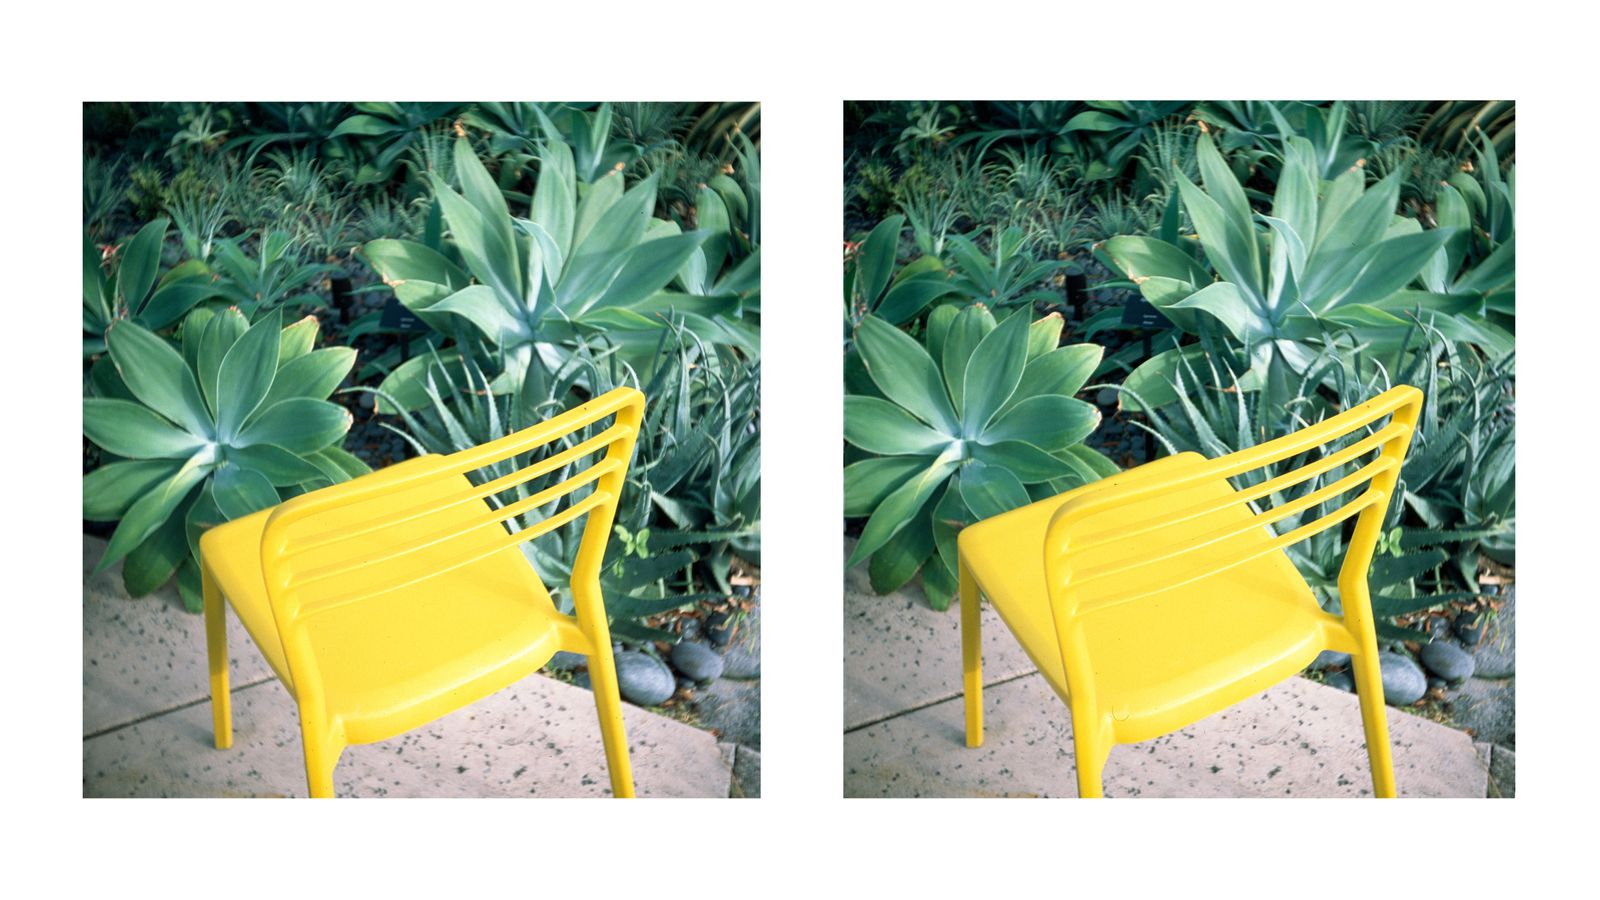 © RACHEL TREIDE - Stereograph by Rachel Treide: "Miami Yellow Chair," 2018 (to view this image in 3D, use the stereo freeview method)